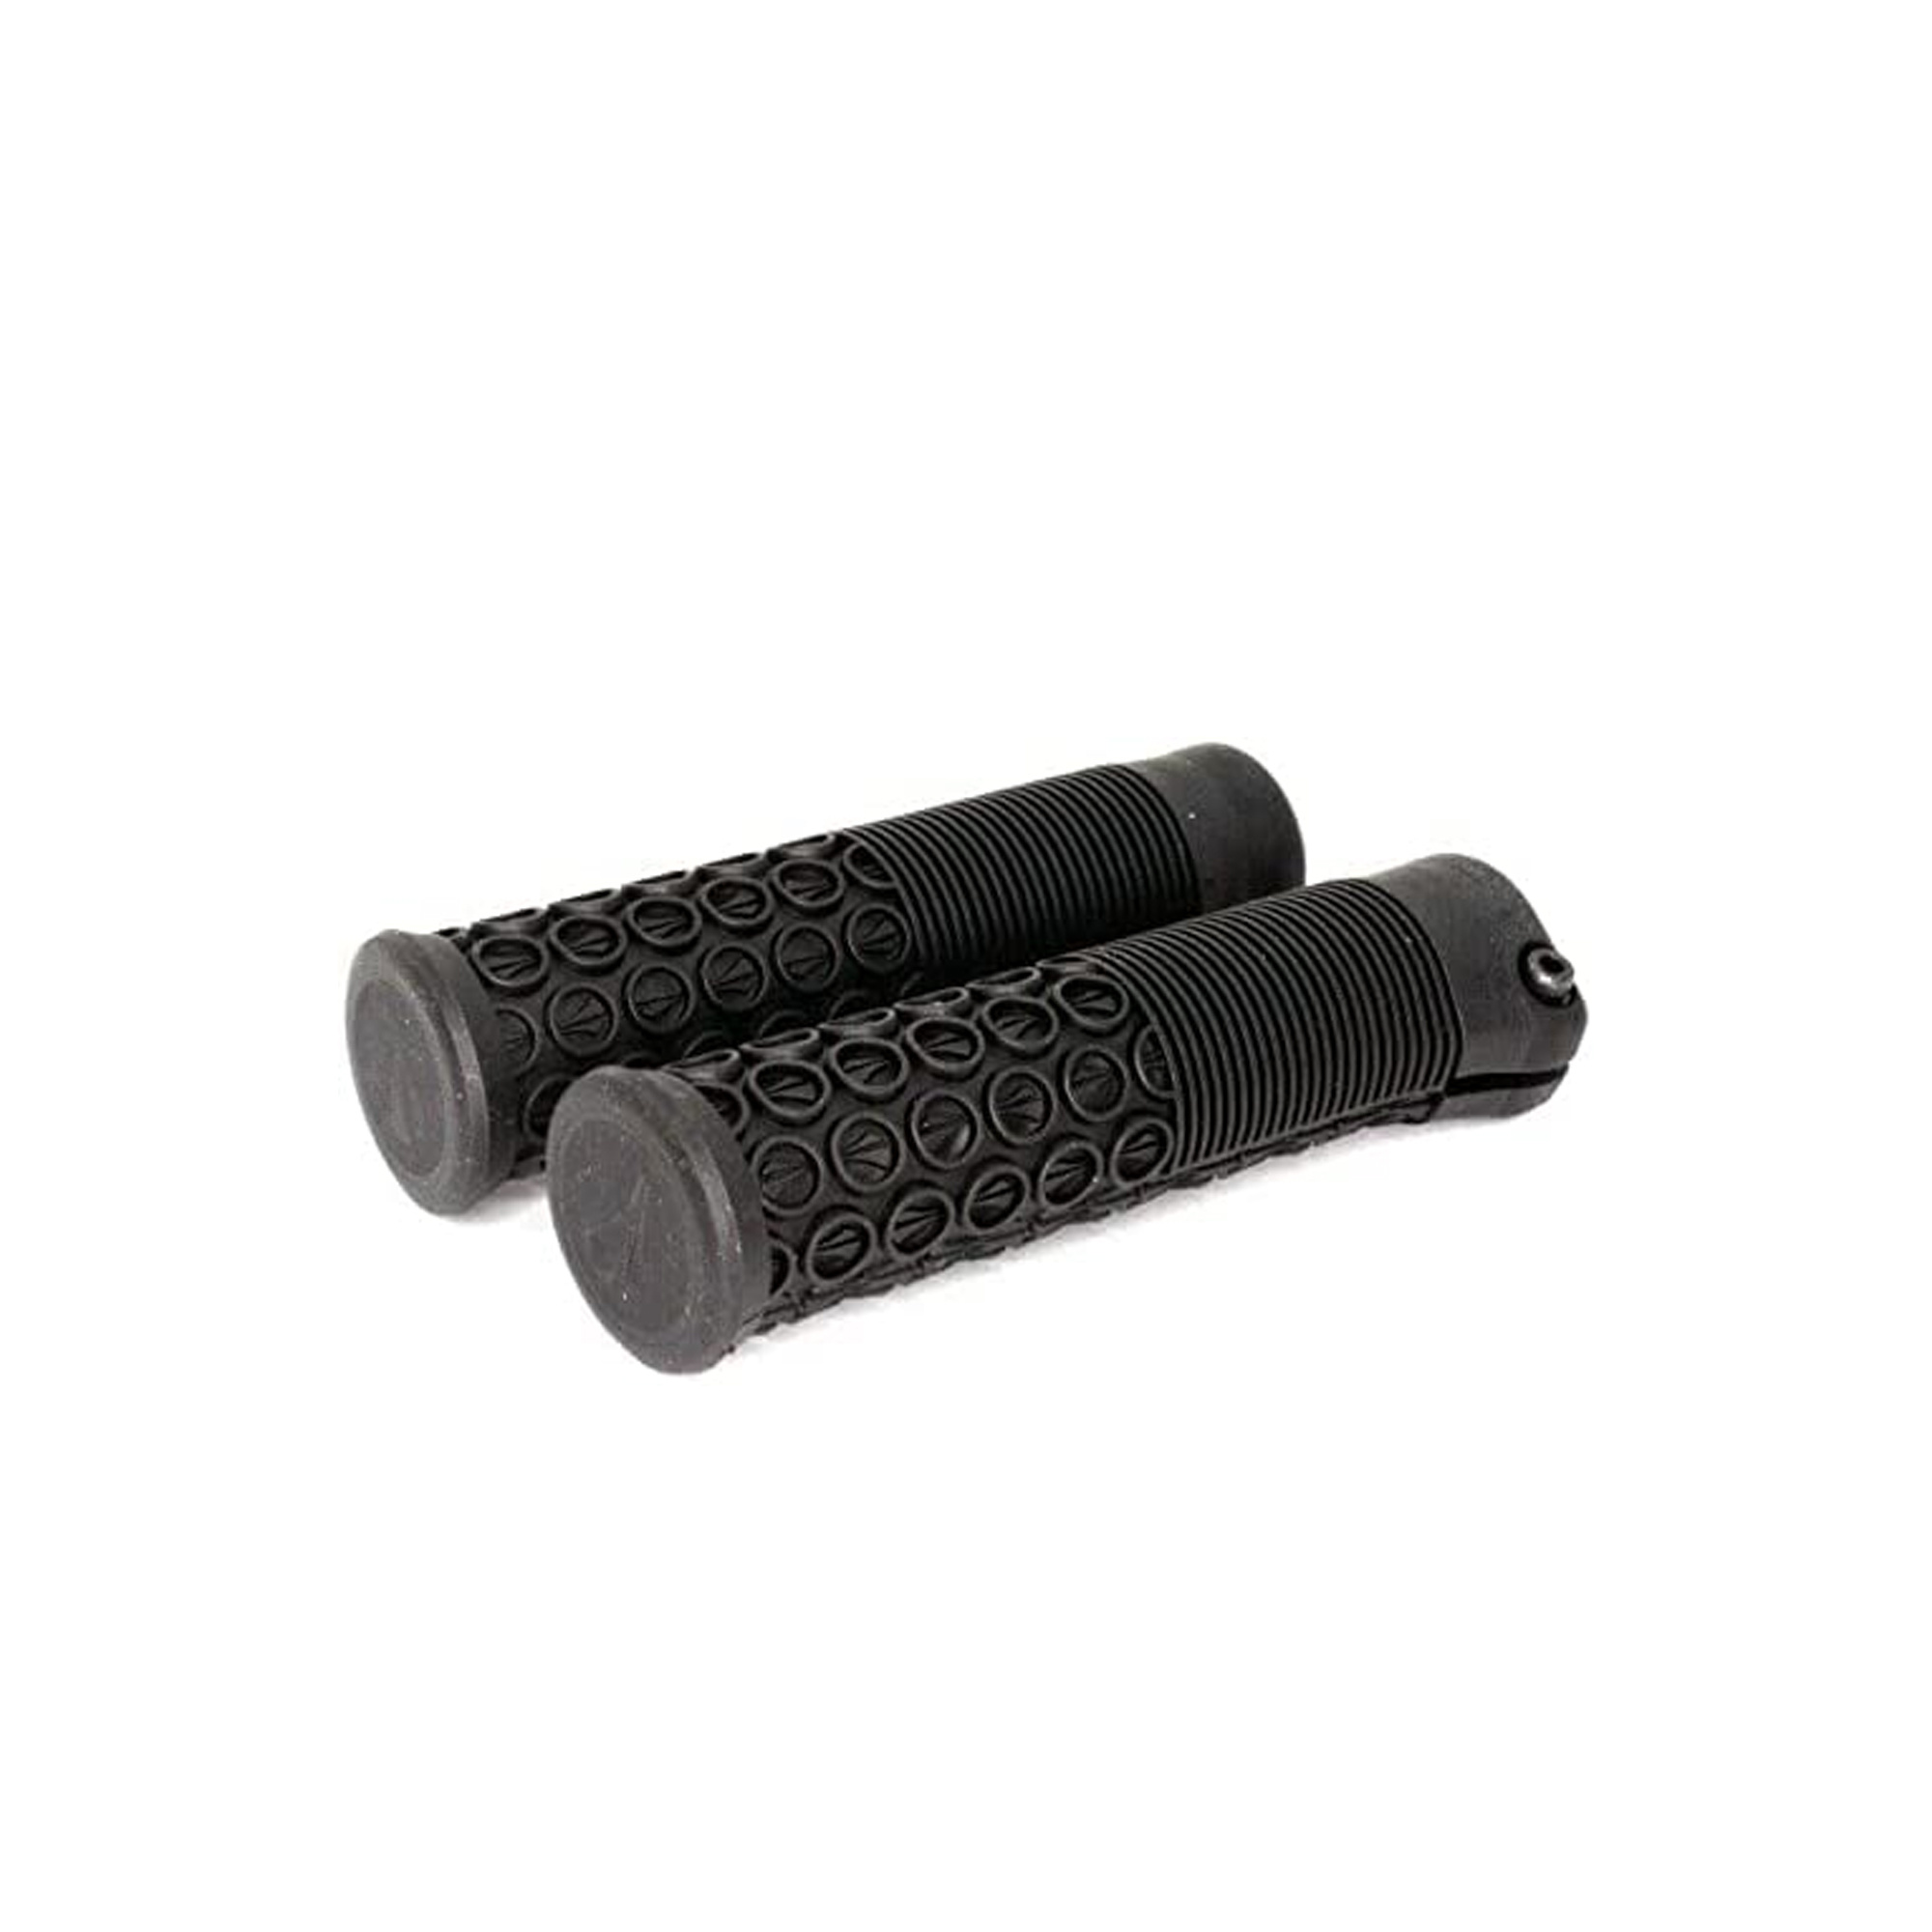 SDG Components SDG Components, Thrice 33, Grips, 136mm, Black, Pair